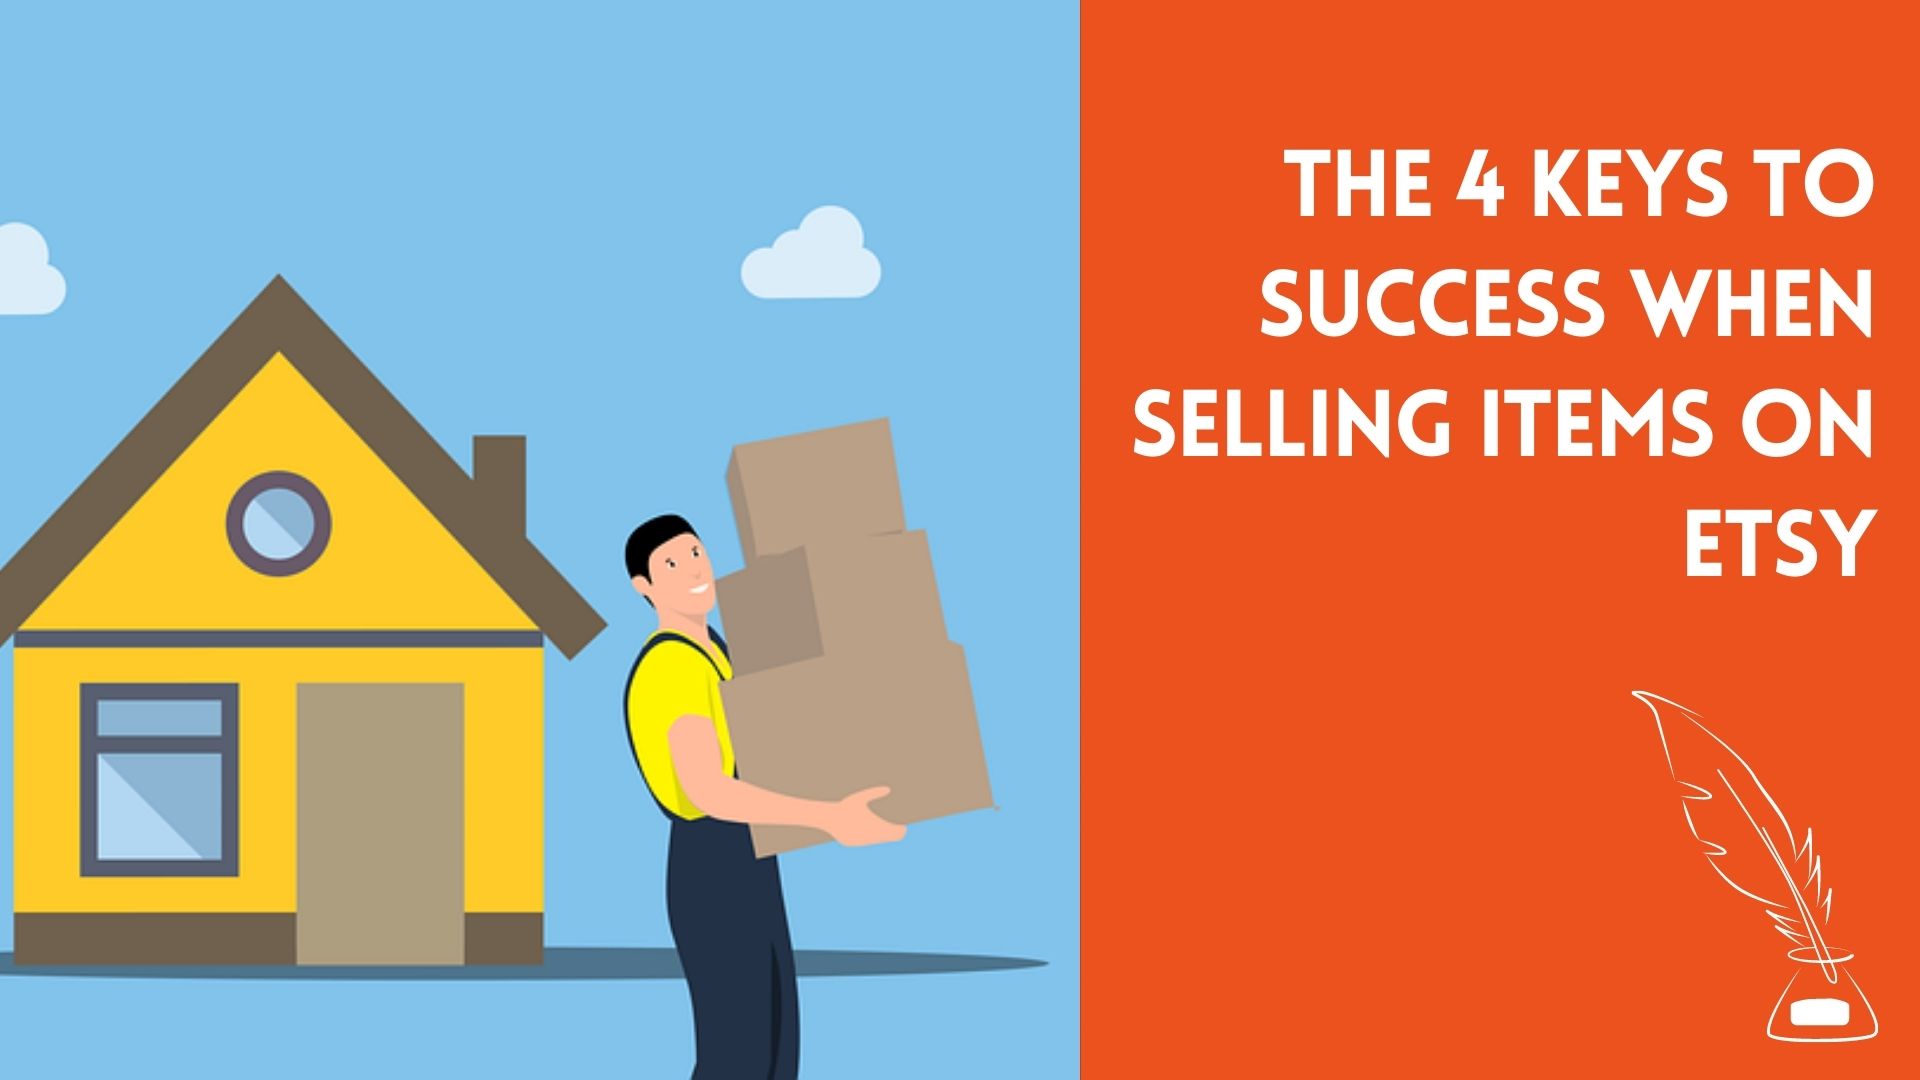 The 4 Keys to Success When Selling Items On Etsy